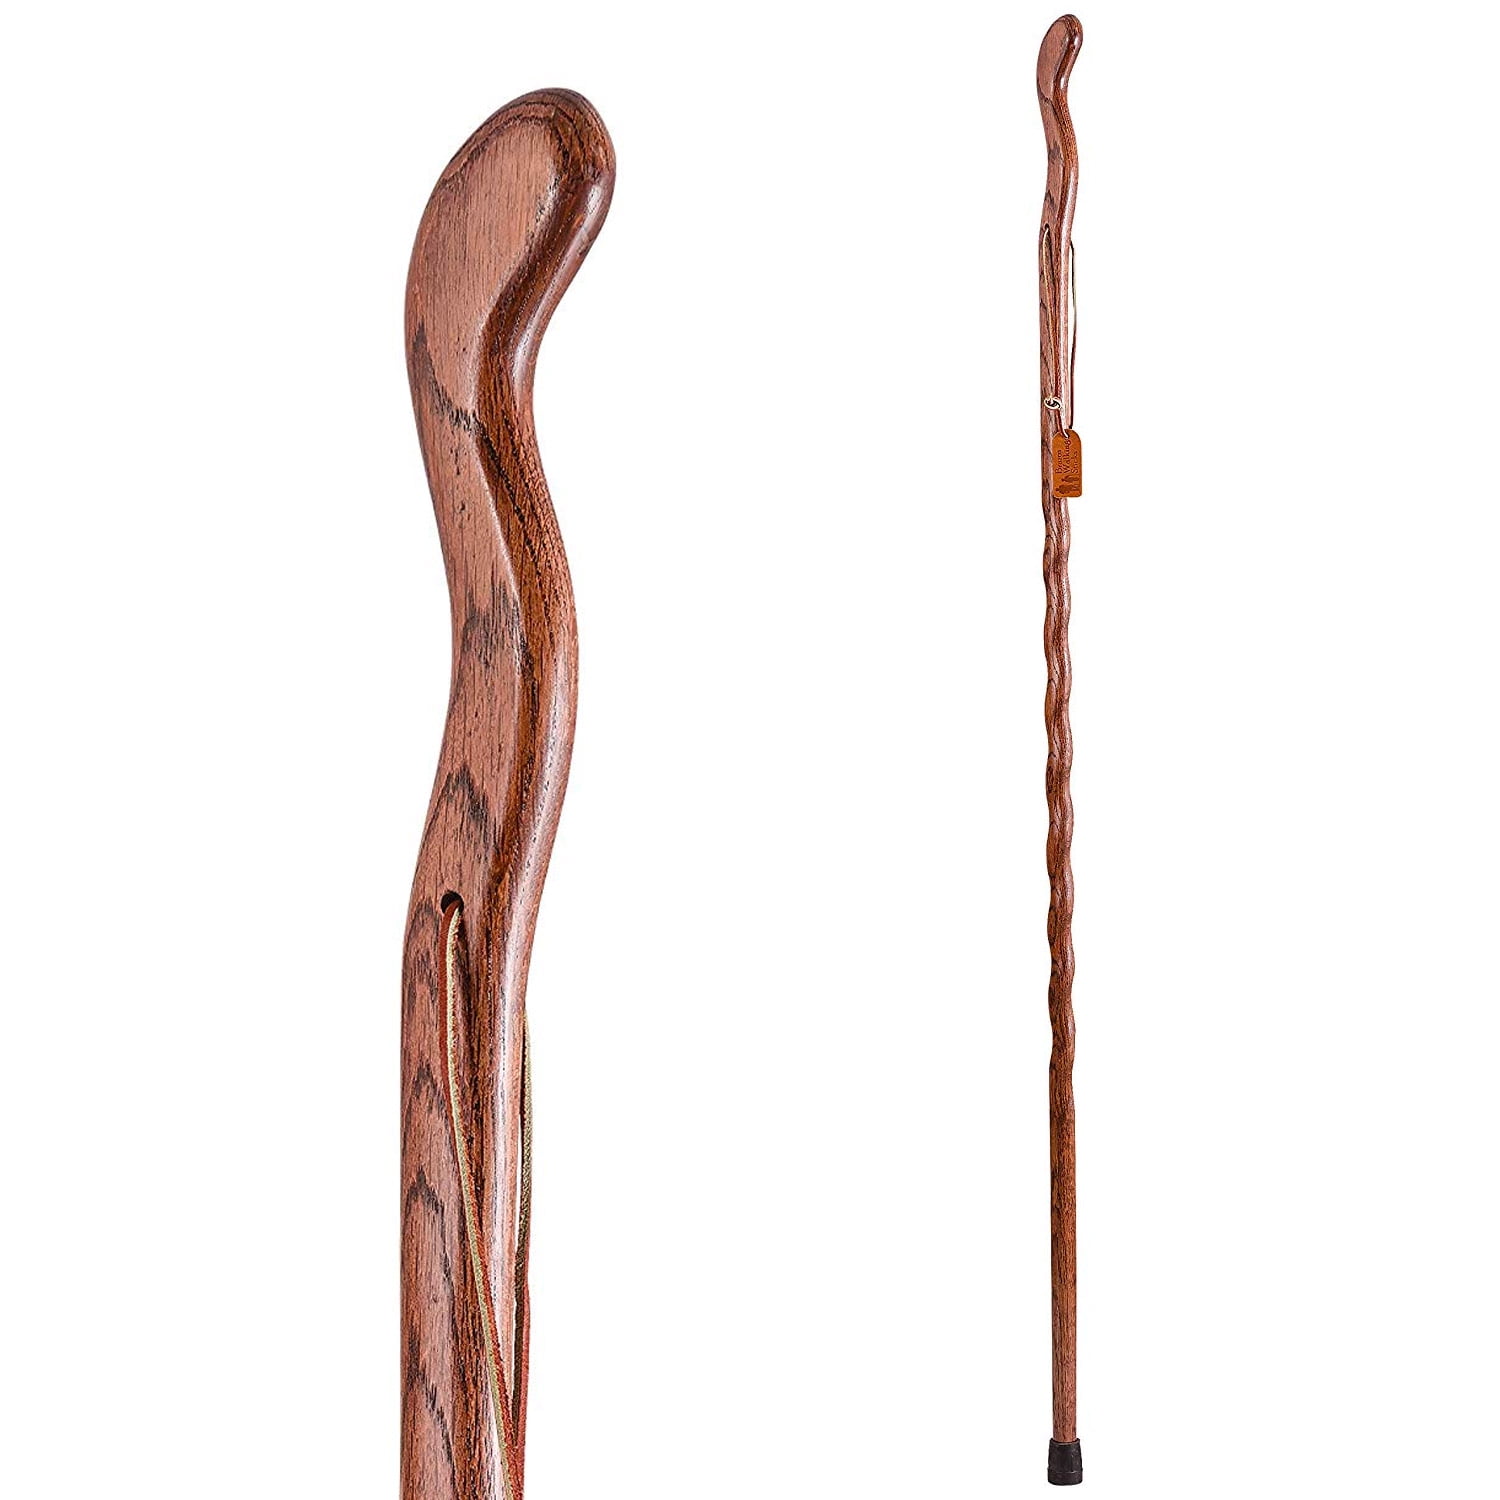 55 Inches Brazos Trekking Pole Hiking Stick for Men and Women Handcrafted of Lightweight Wood and made in the USA Red Oak 